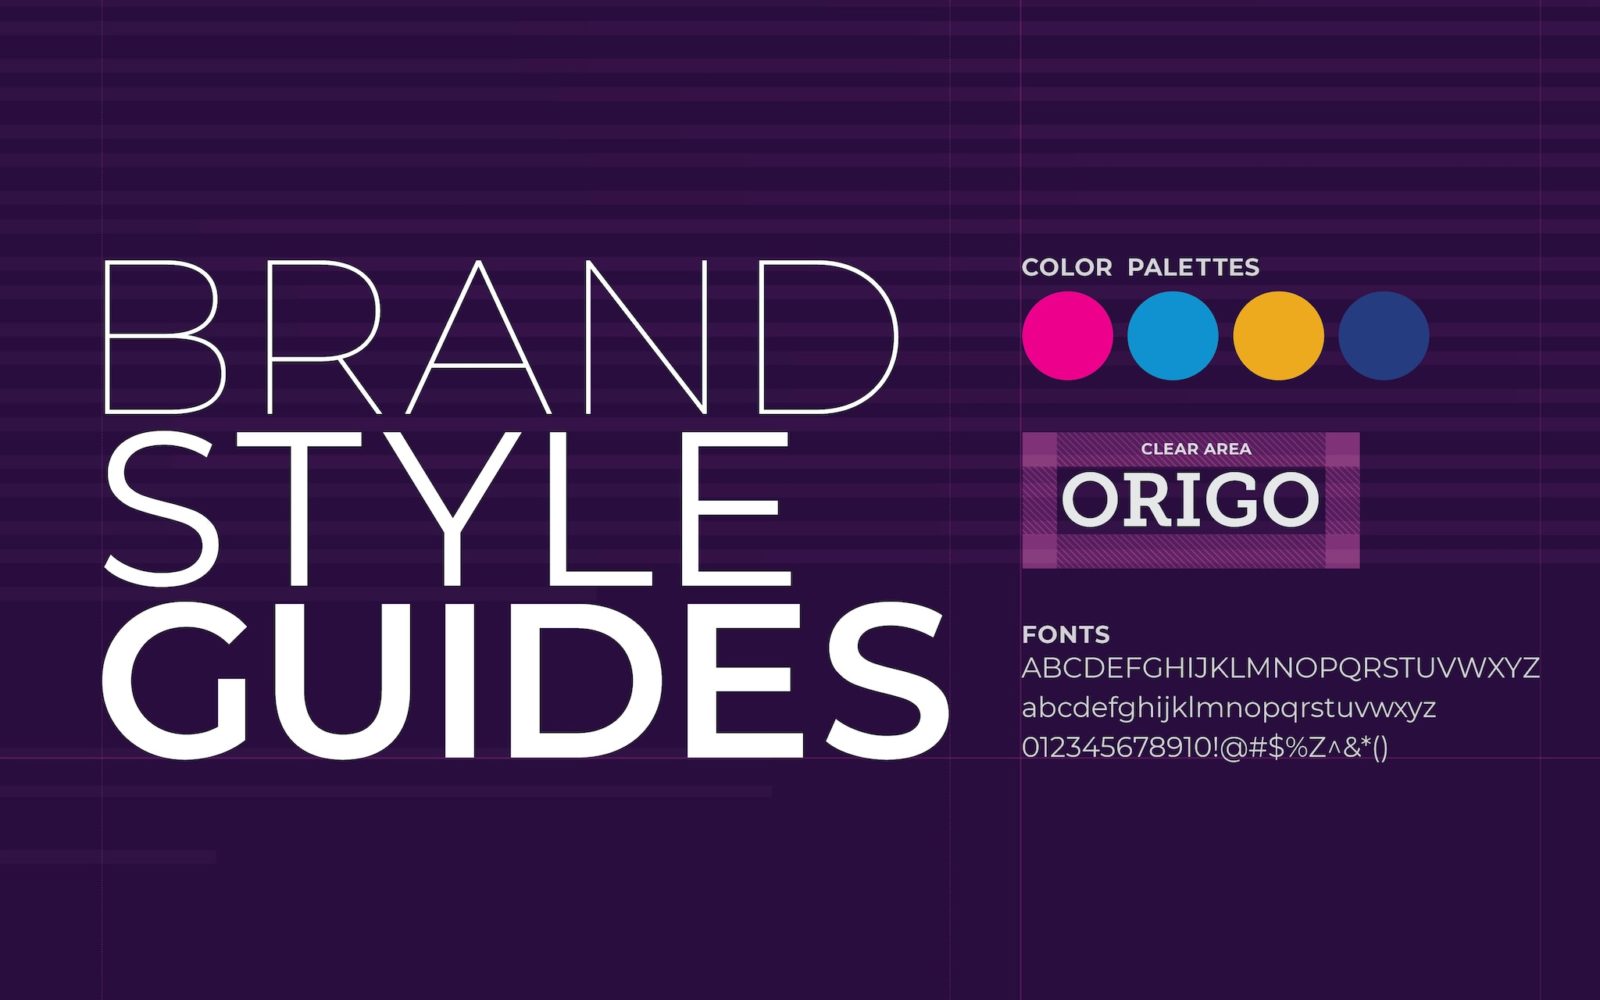 Brand Style Guides